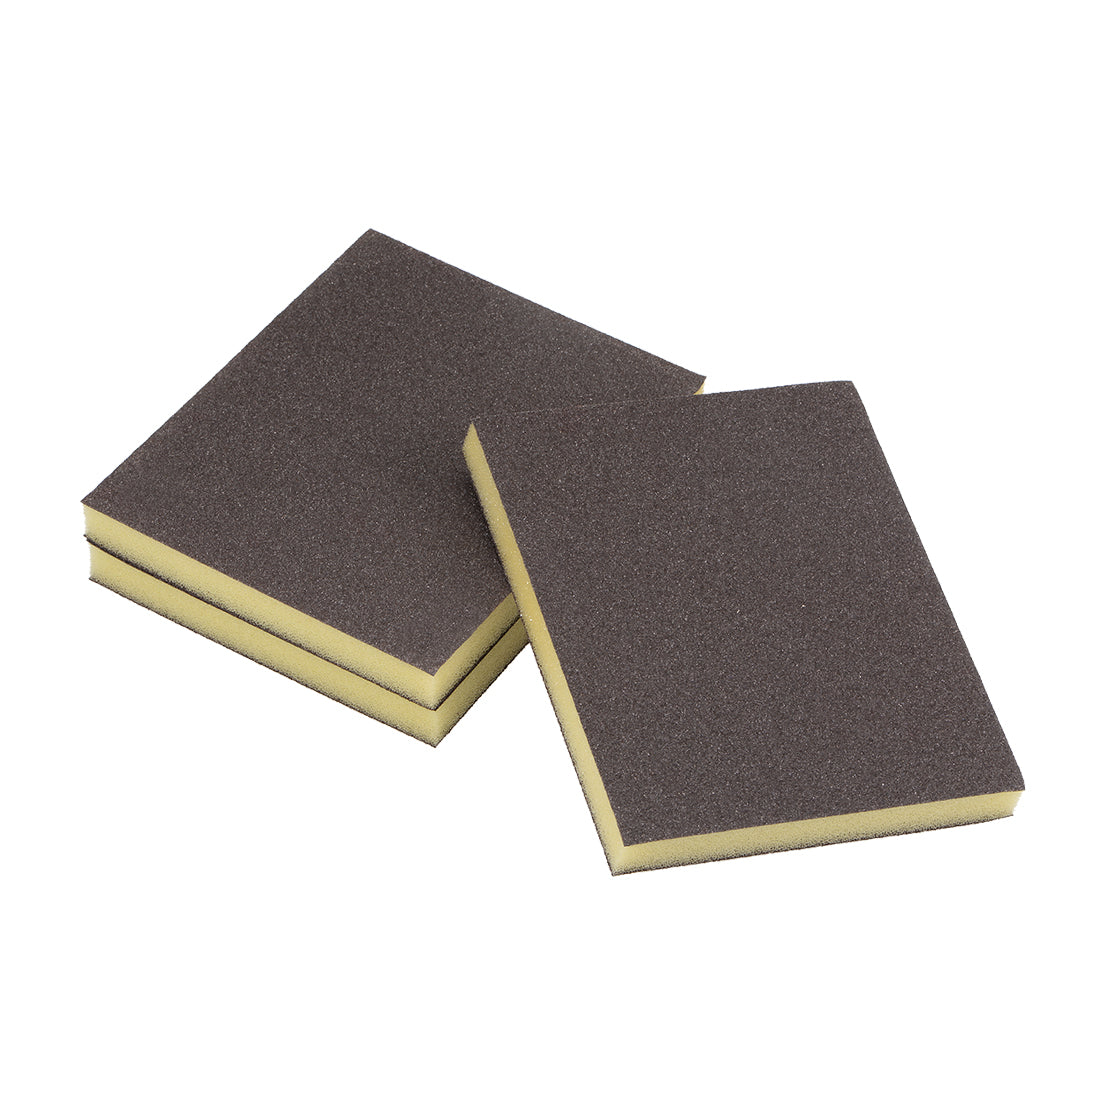 uxcell Uxcell Sanding Sponge 150 Grit Sanding Block Pad 4.7inch x 3.9inch x 0.4inch Brown 3pcs